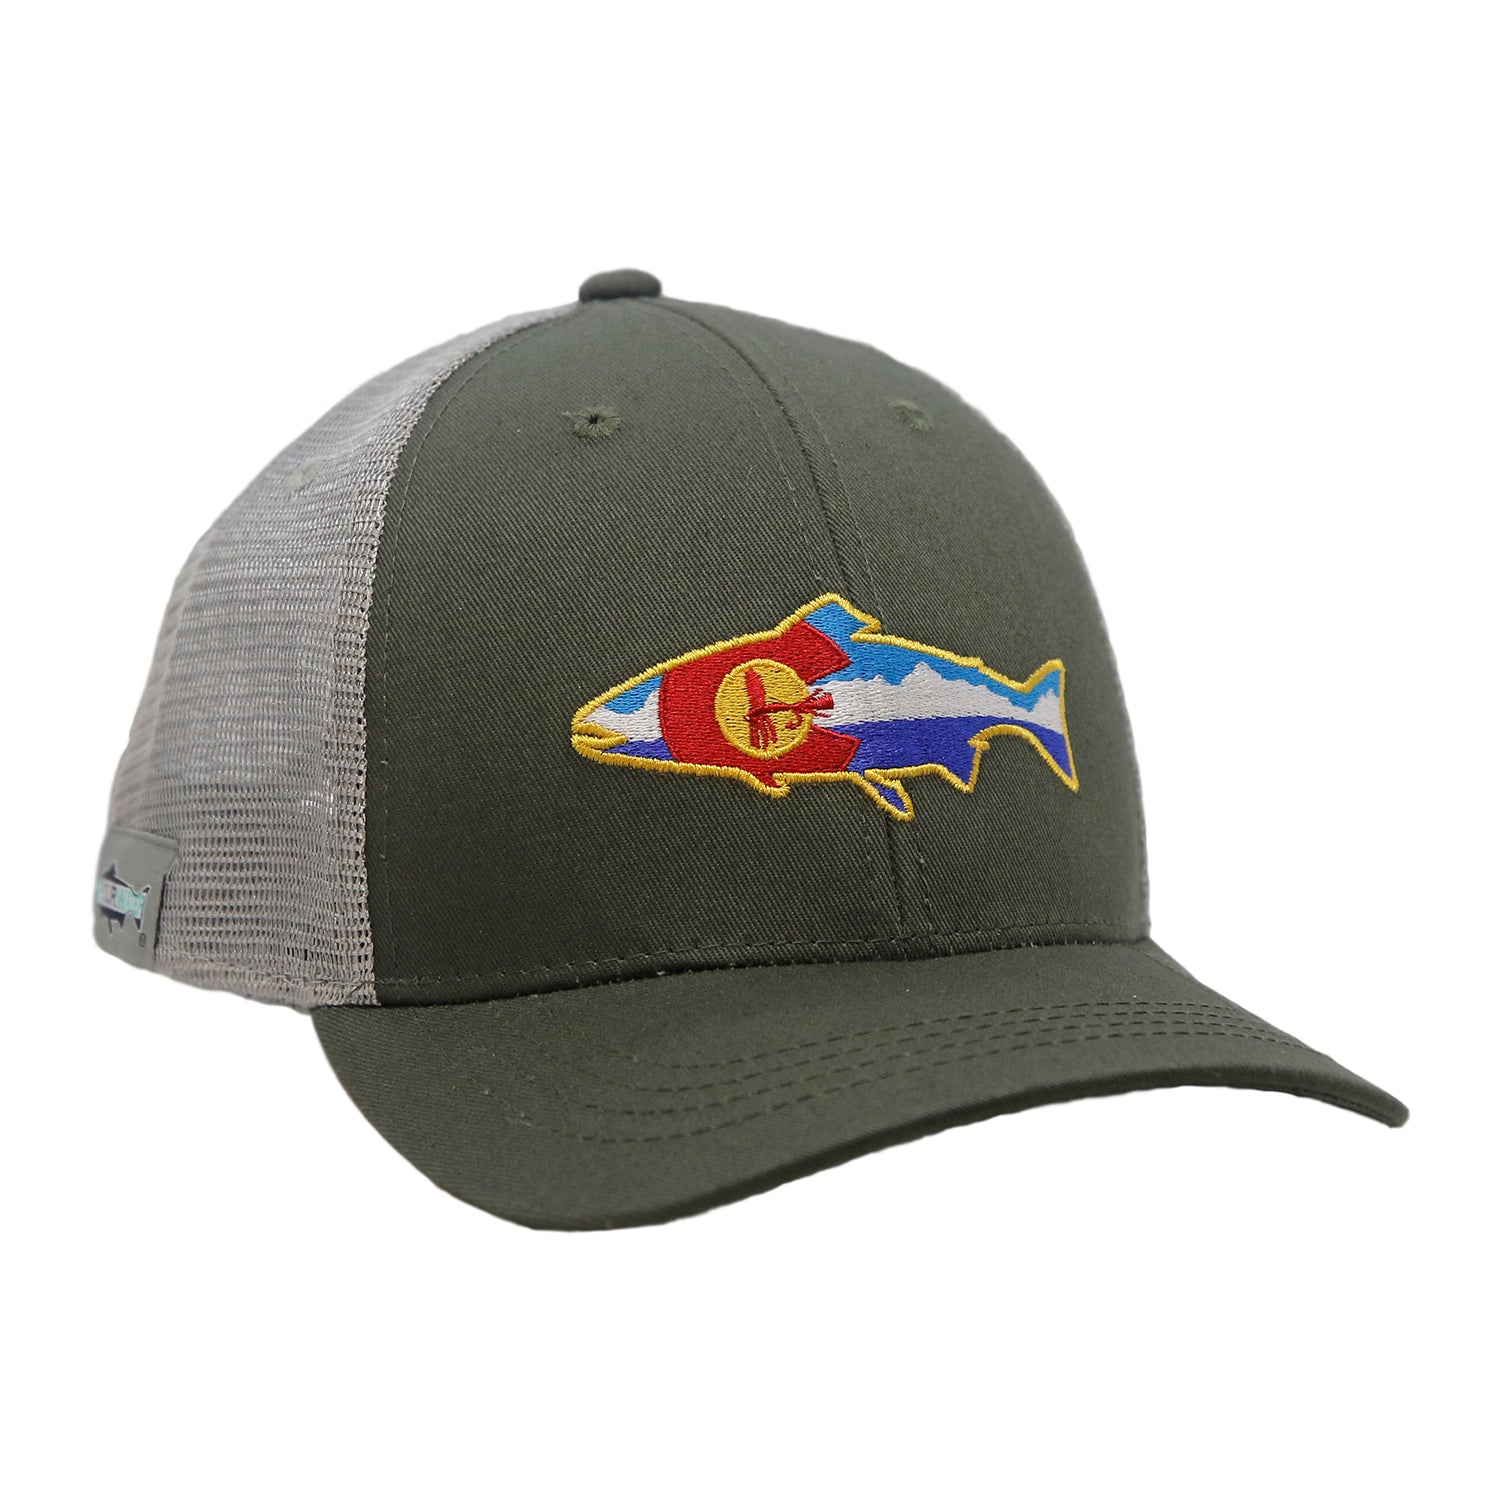 A hat with gray mesh back and green fabric in the front has embroidery in the shape of a trout with a mountain scene inside it, a large letter C and a dry fly